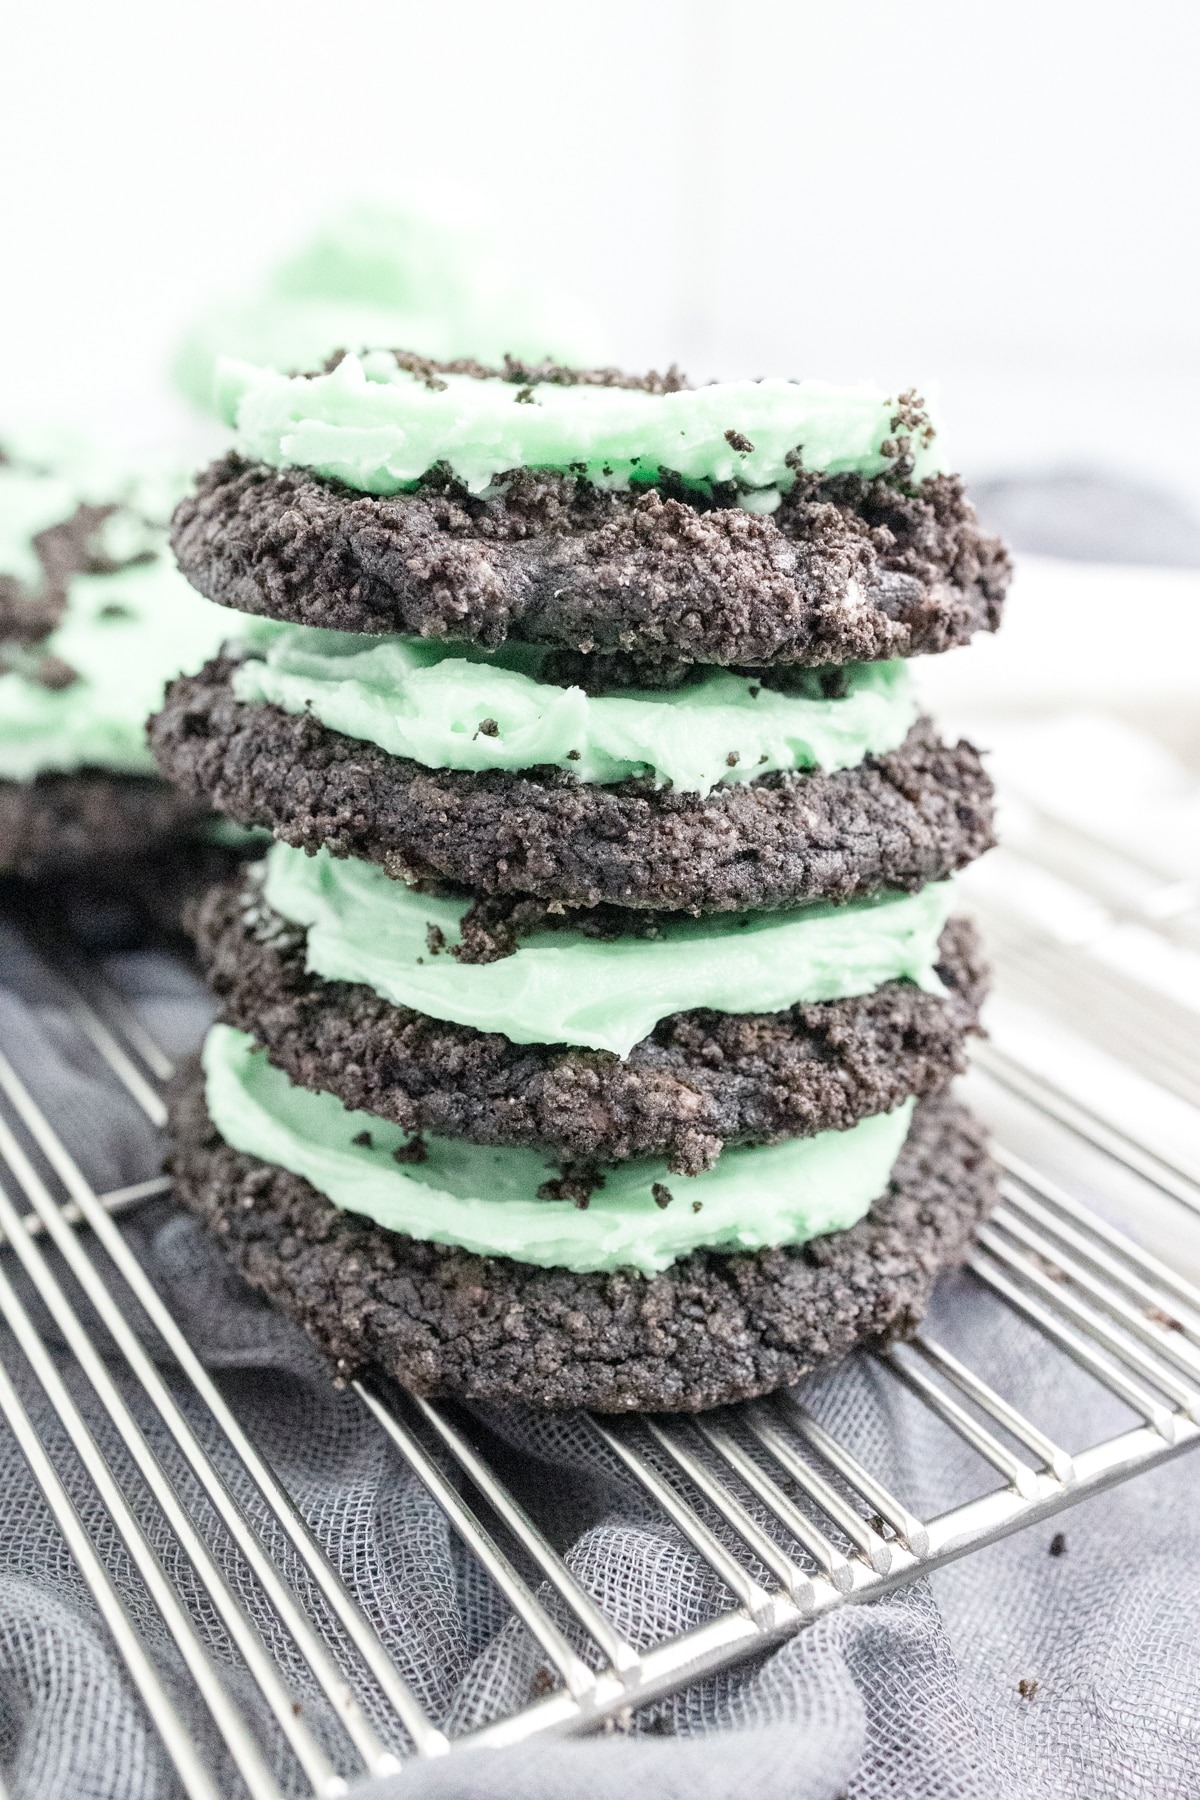 Top view of a stack of Frosted Mint Oreo Cookies on a wire rack.